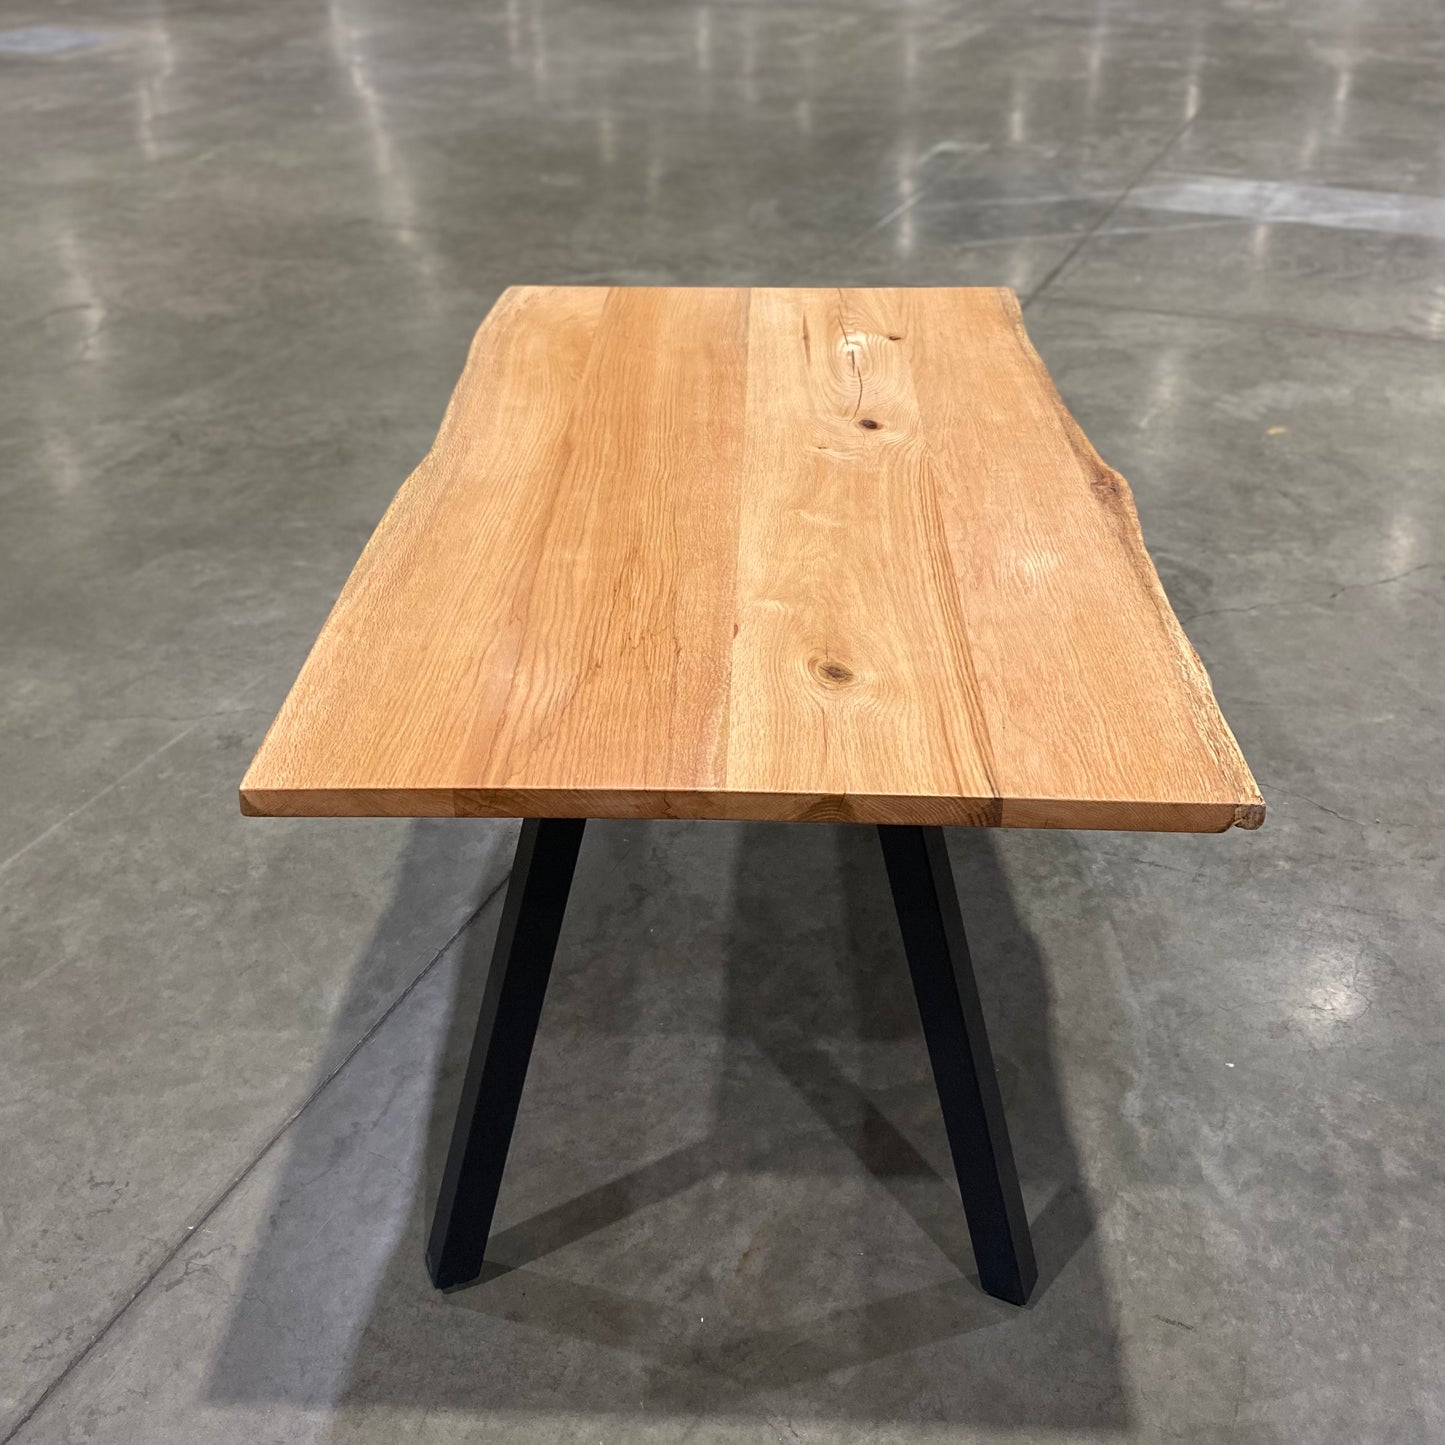 Double Live Edge Red Oak Table